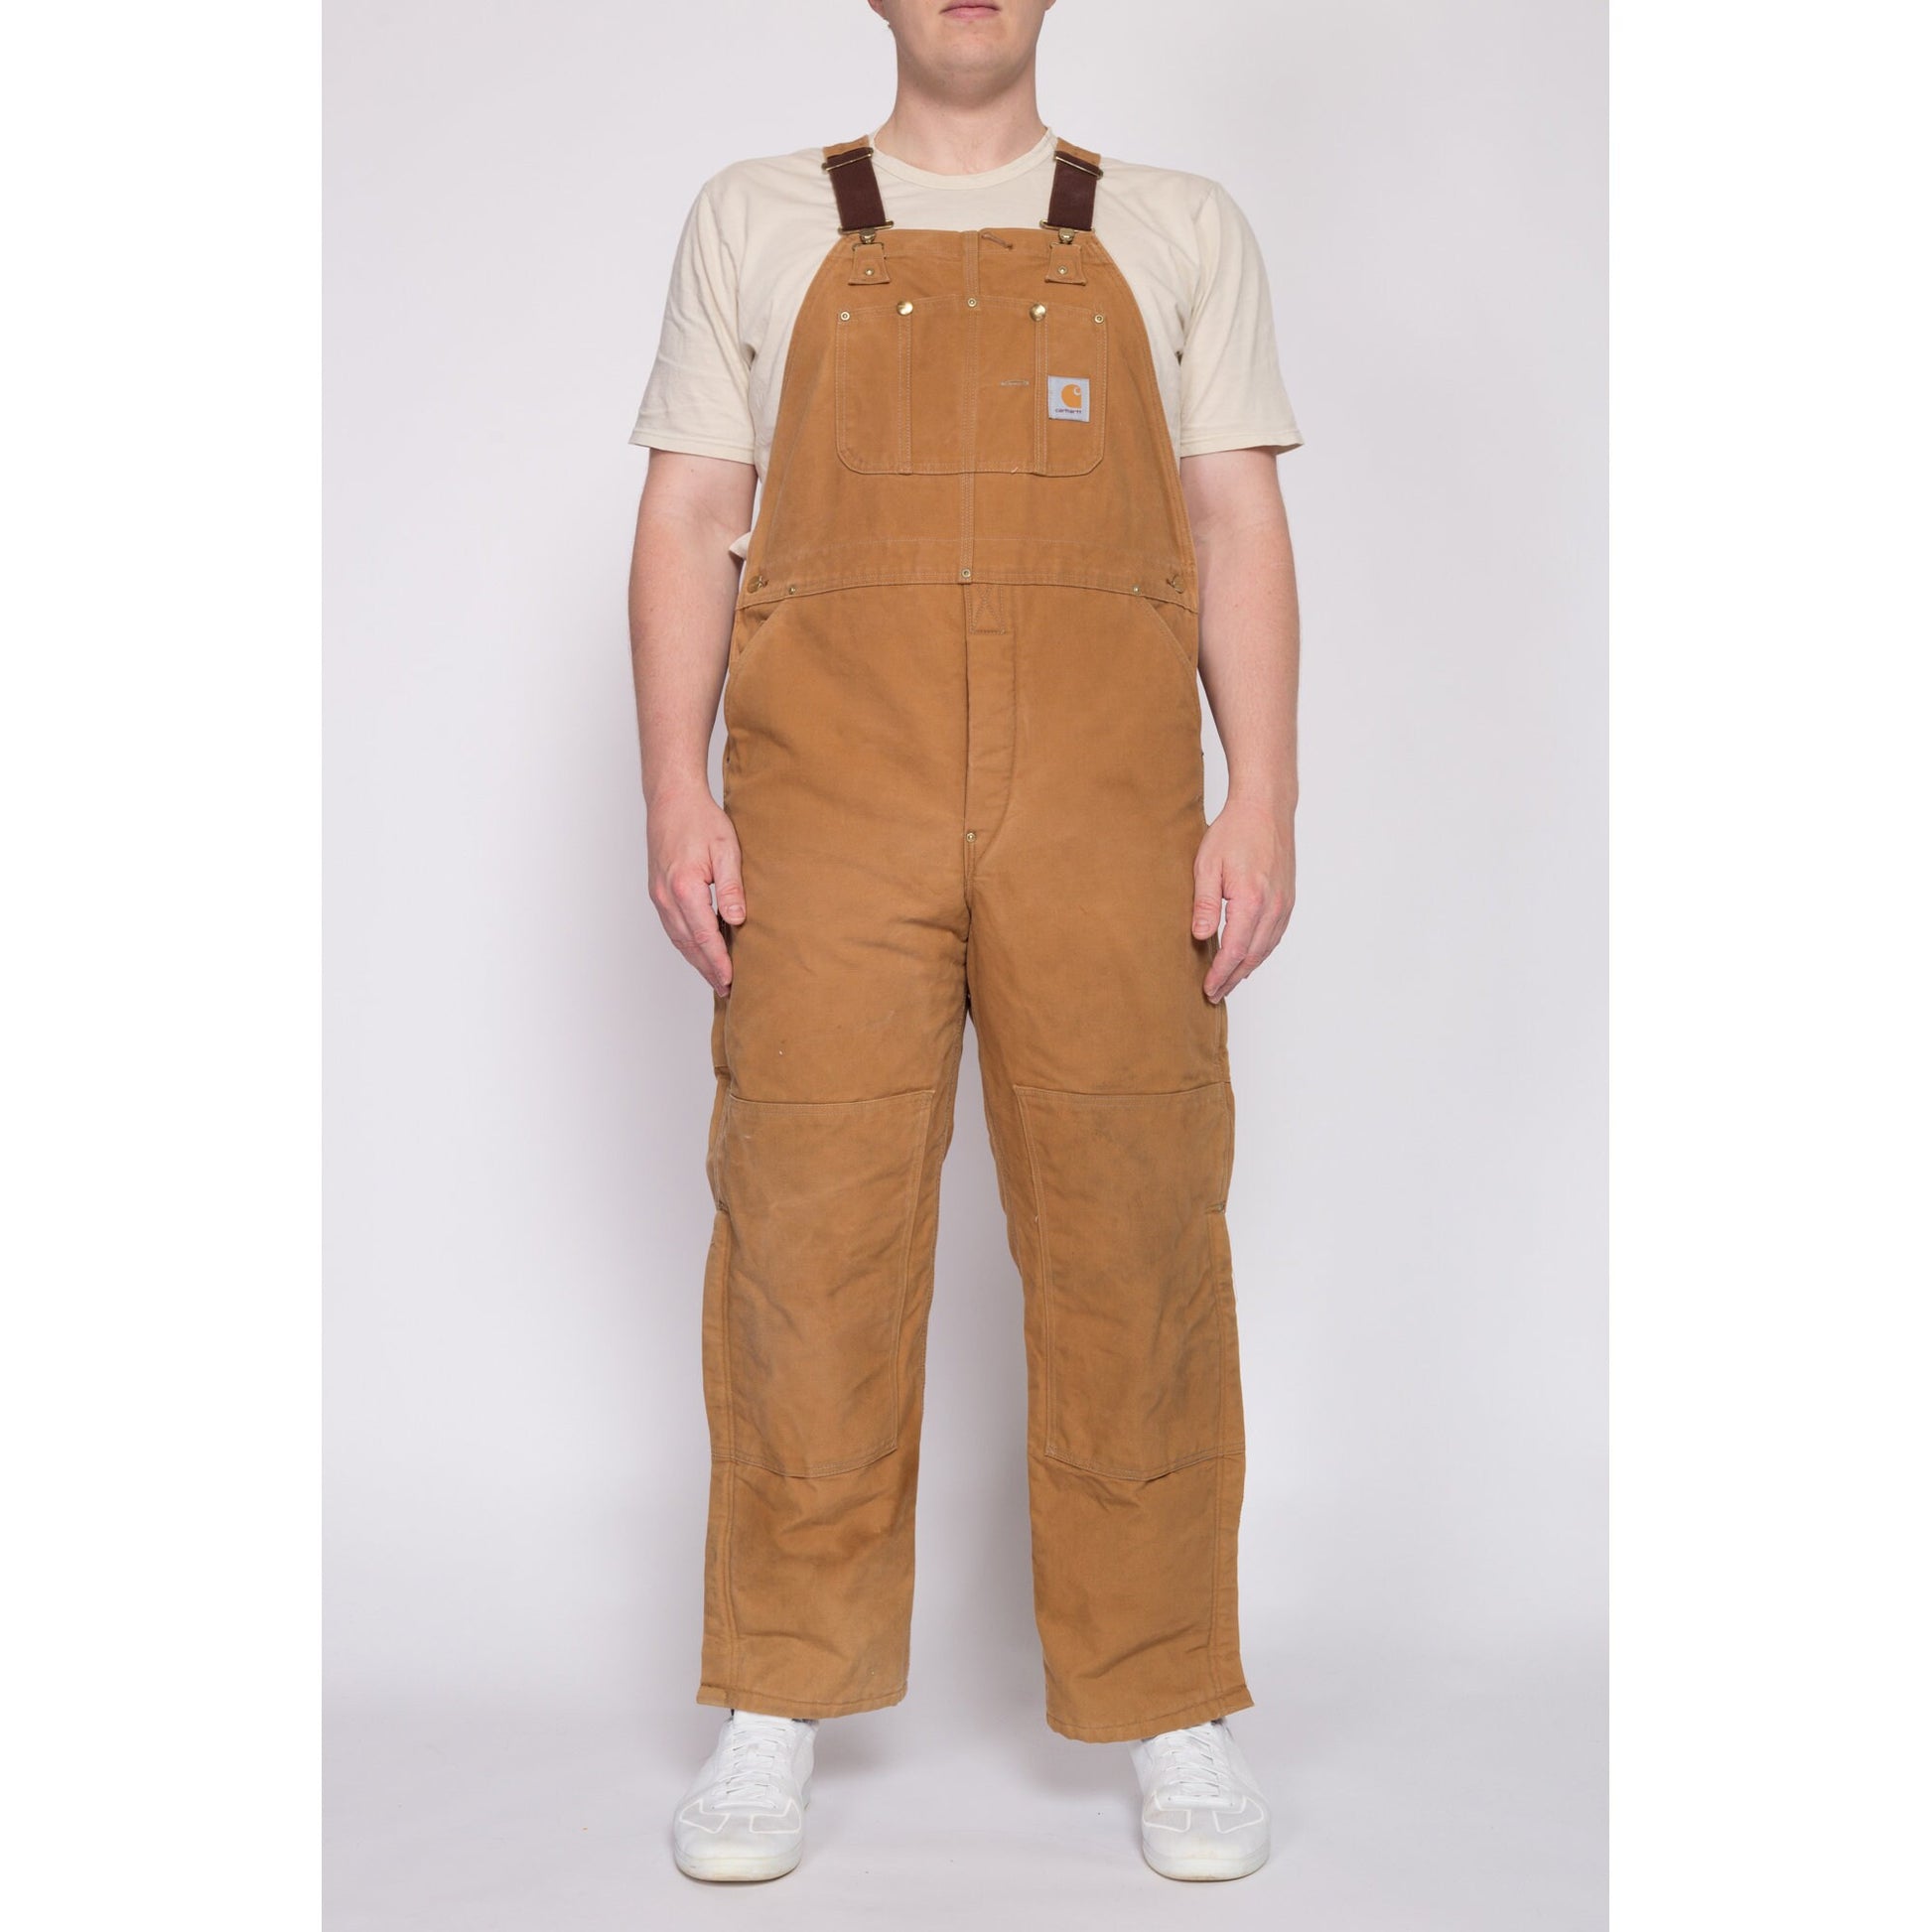 Vintage Carhartt Insulated Quilt Lined Overalls - 44x31 | 90s Y2K Duck Canvas Tan Workwear Jumpsuit